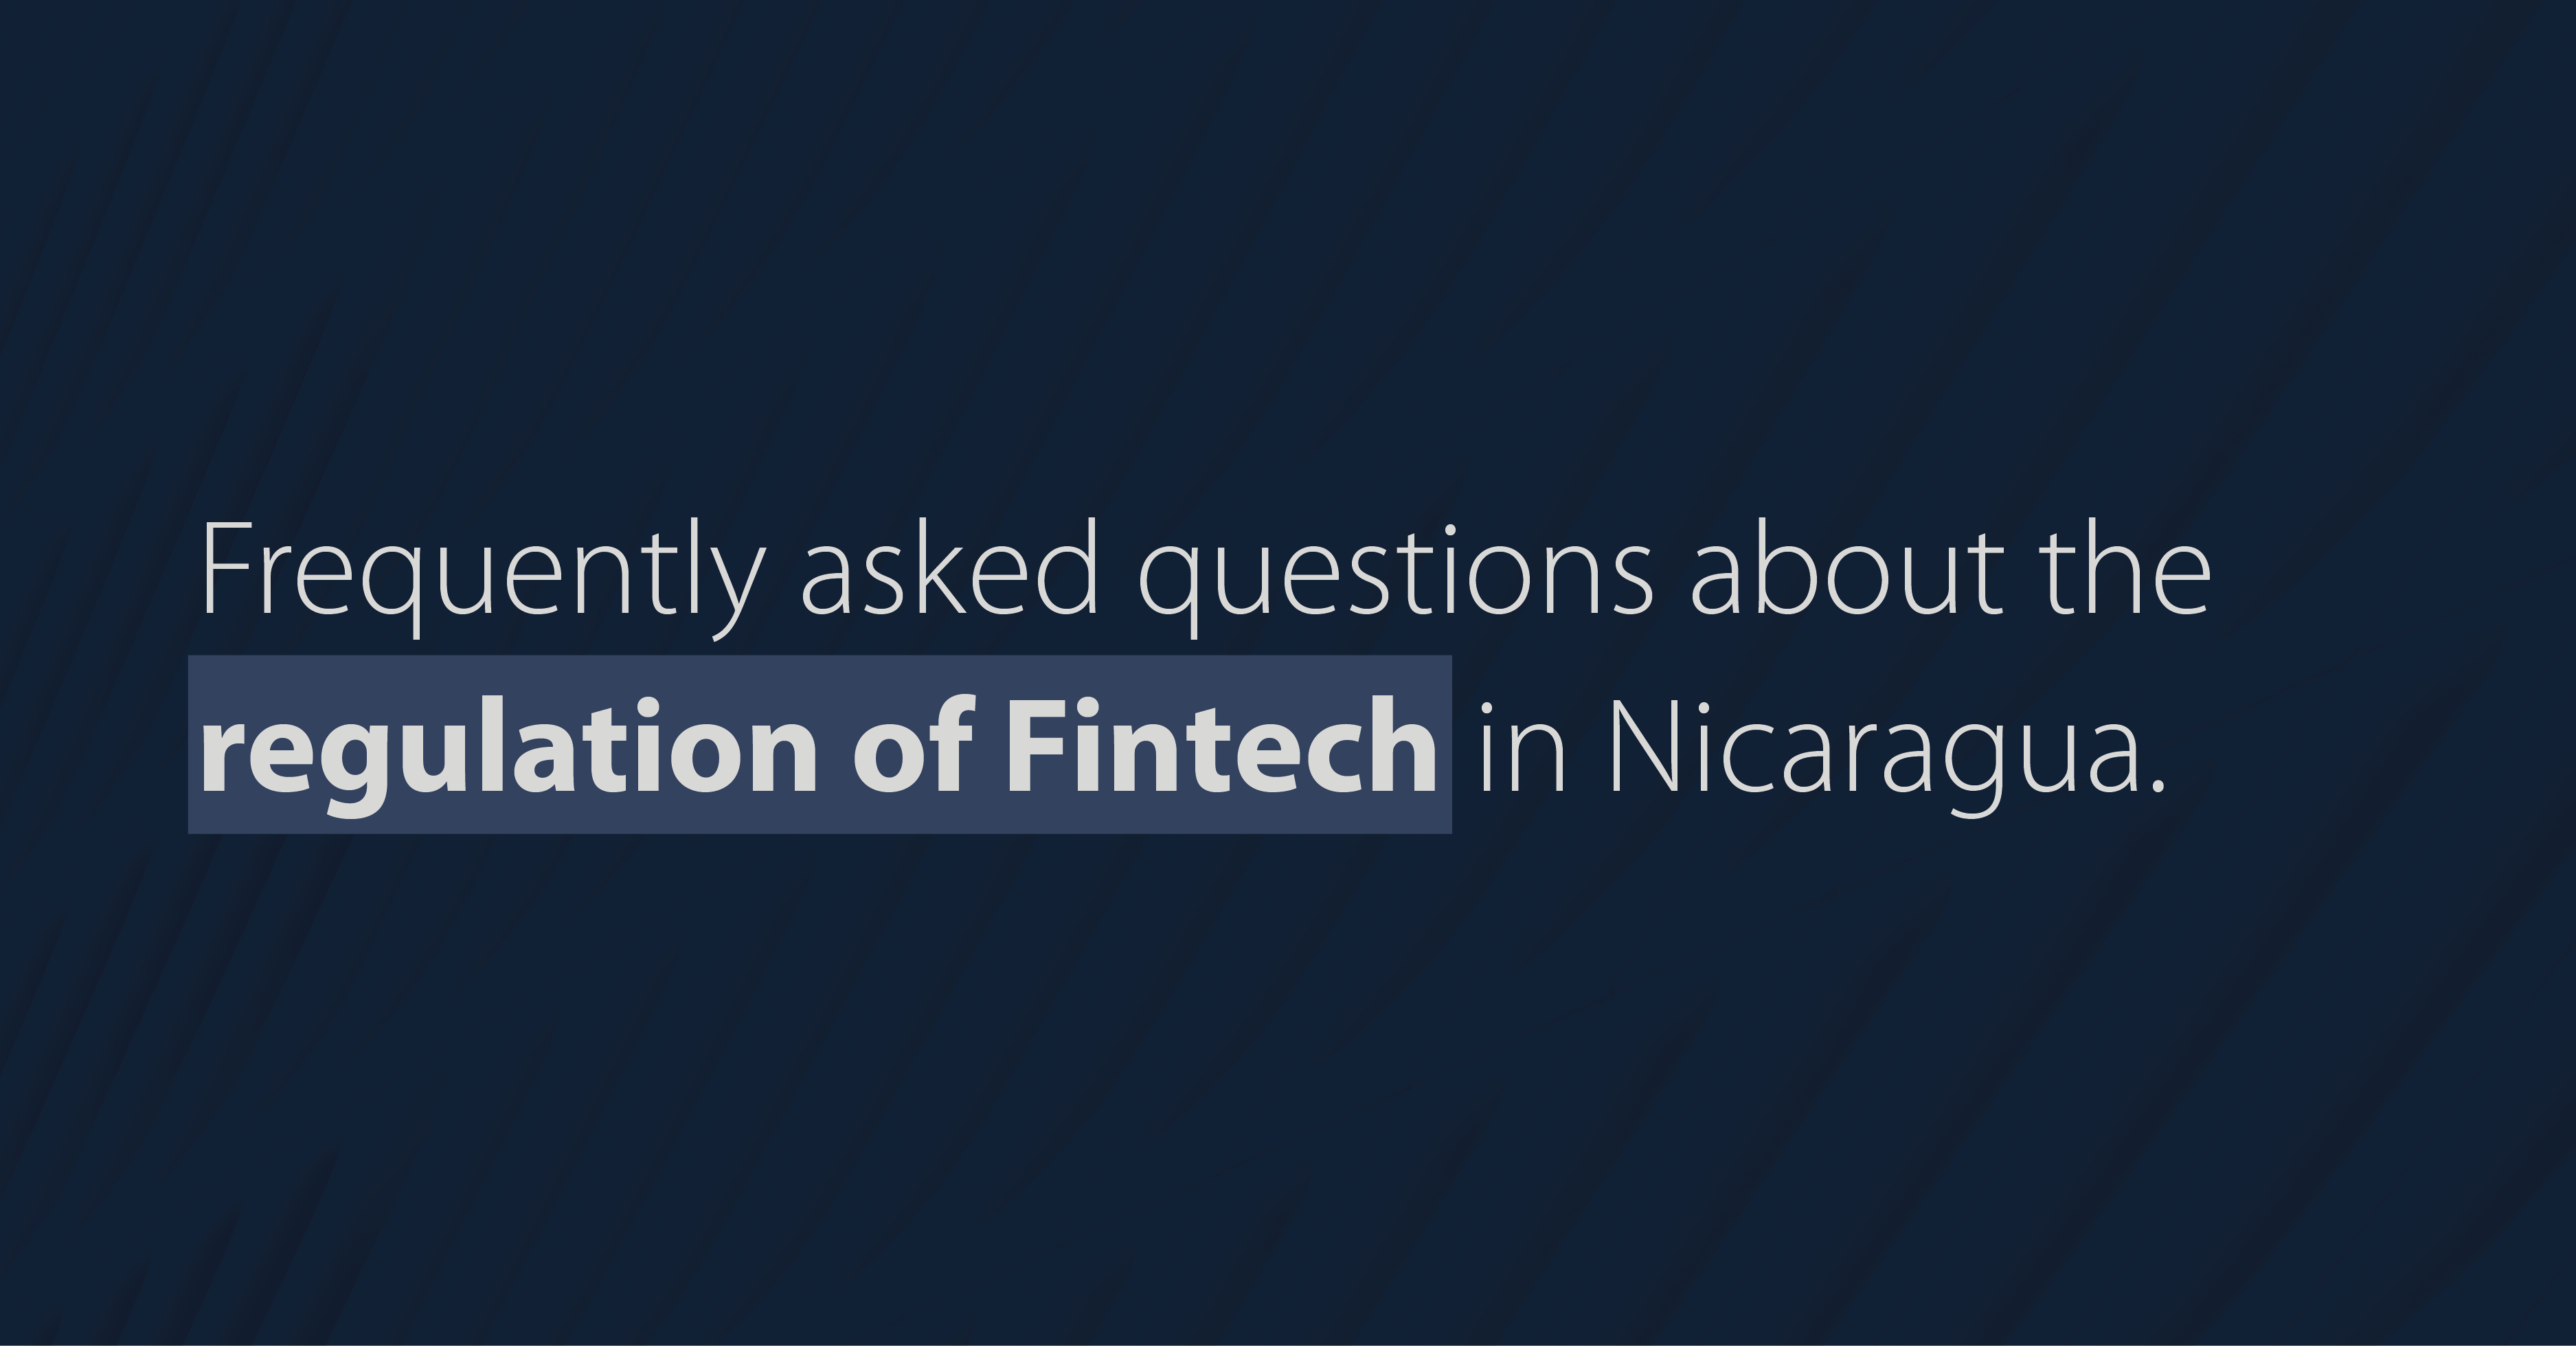 Frequently asked questions about Fintech regulation in Nicaragua